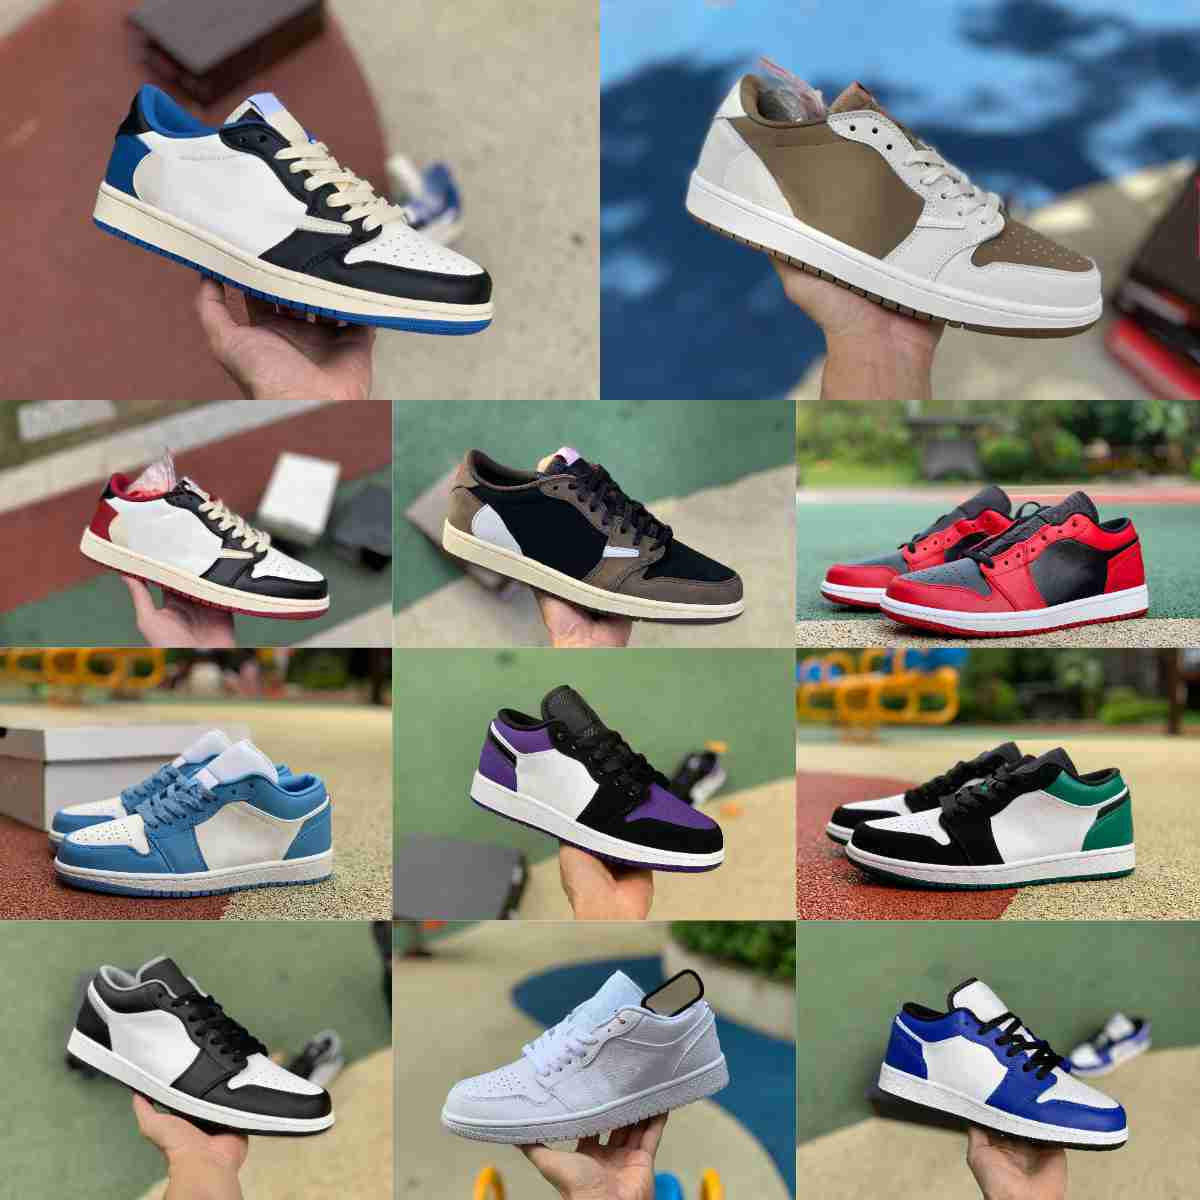 

2023 Fragment TS Travis Low Basketball Shoes Jumpman X 1 1S Court Purple Black Toe Shadow Panda Crimson Tint White Brown Red Scottss Gold Grey UNC Sports Sneakers S17, Please contact us